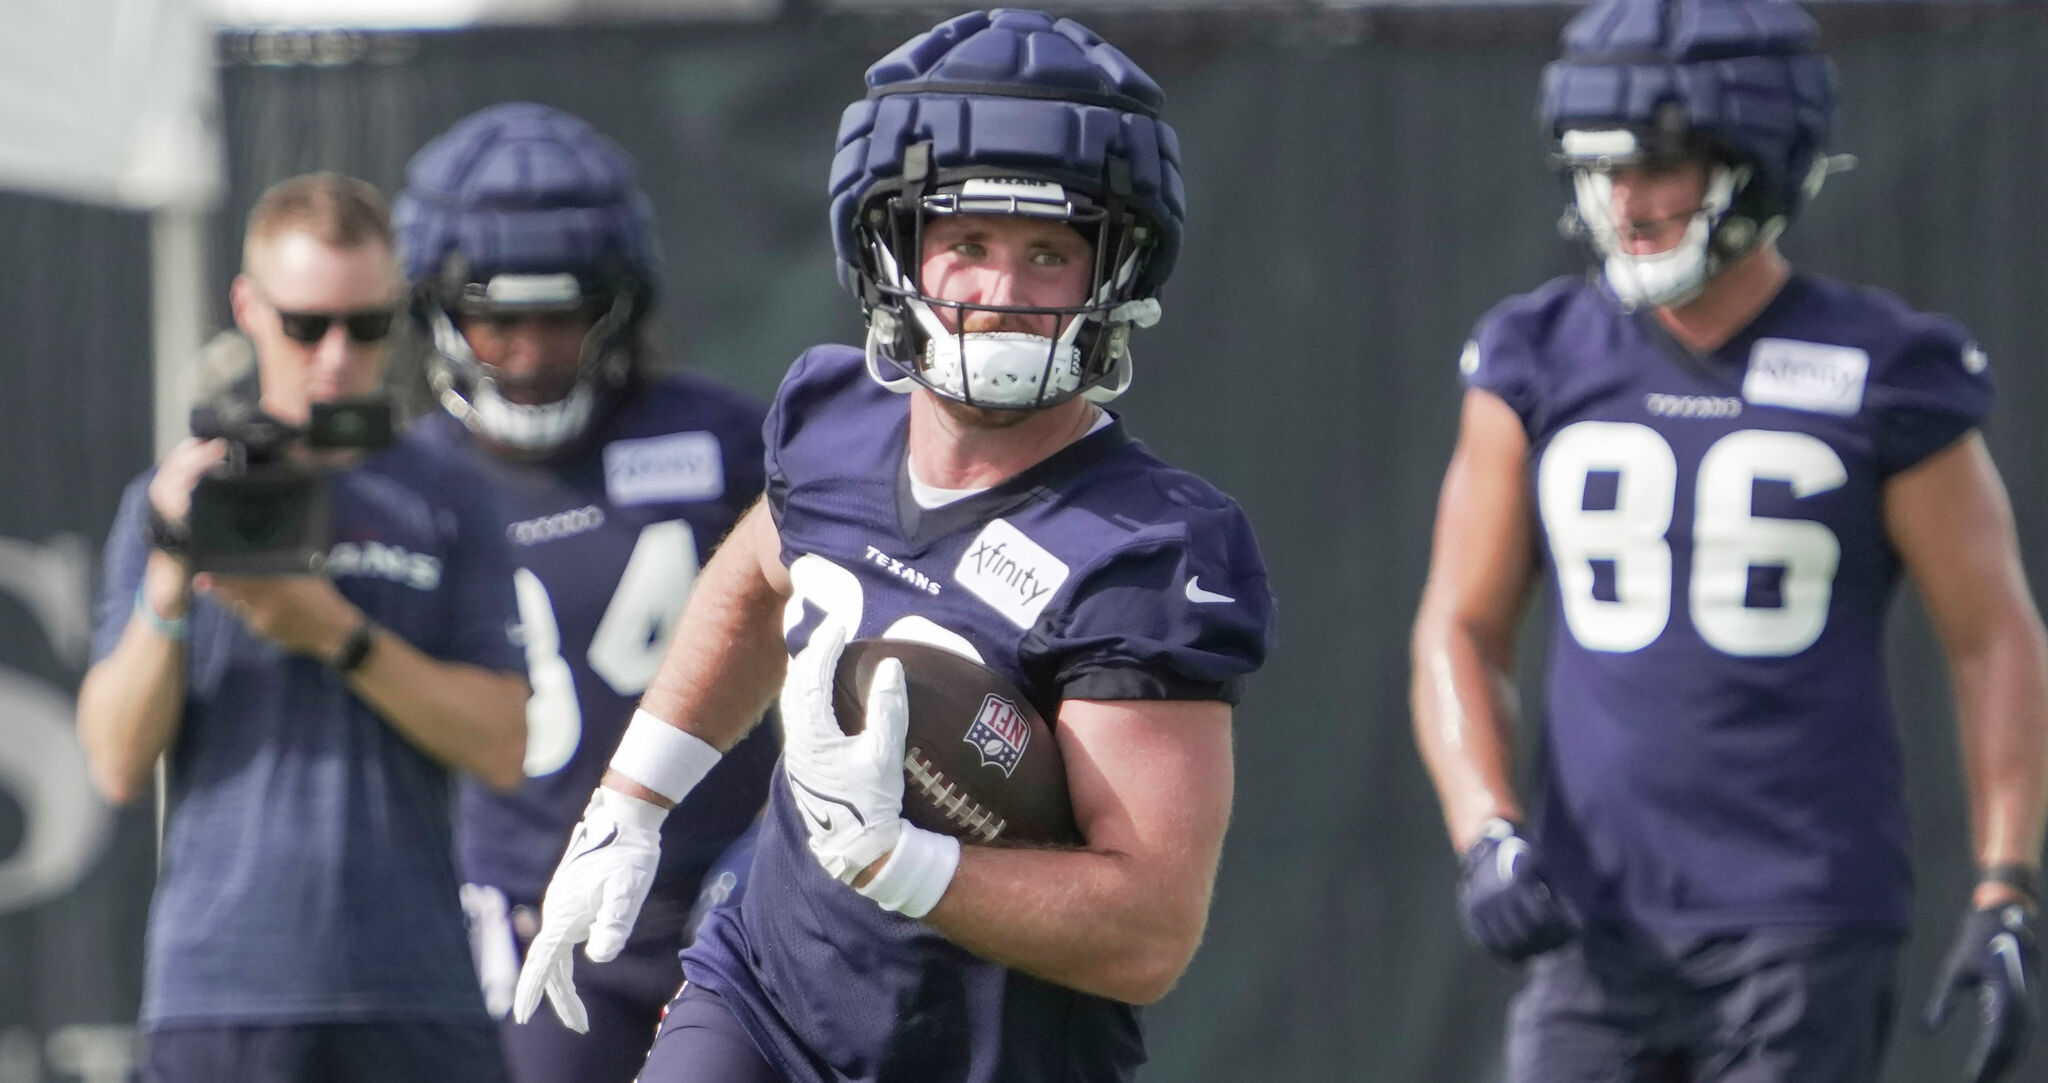 PFF Tight End Rankings: Top 15 ahead of the 2023 NFL season